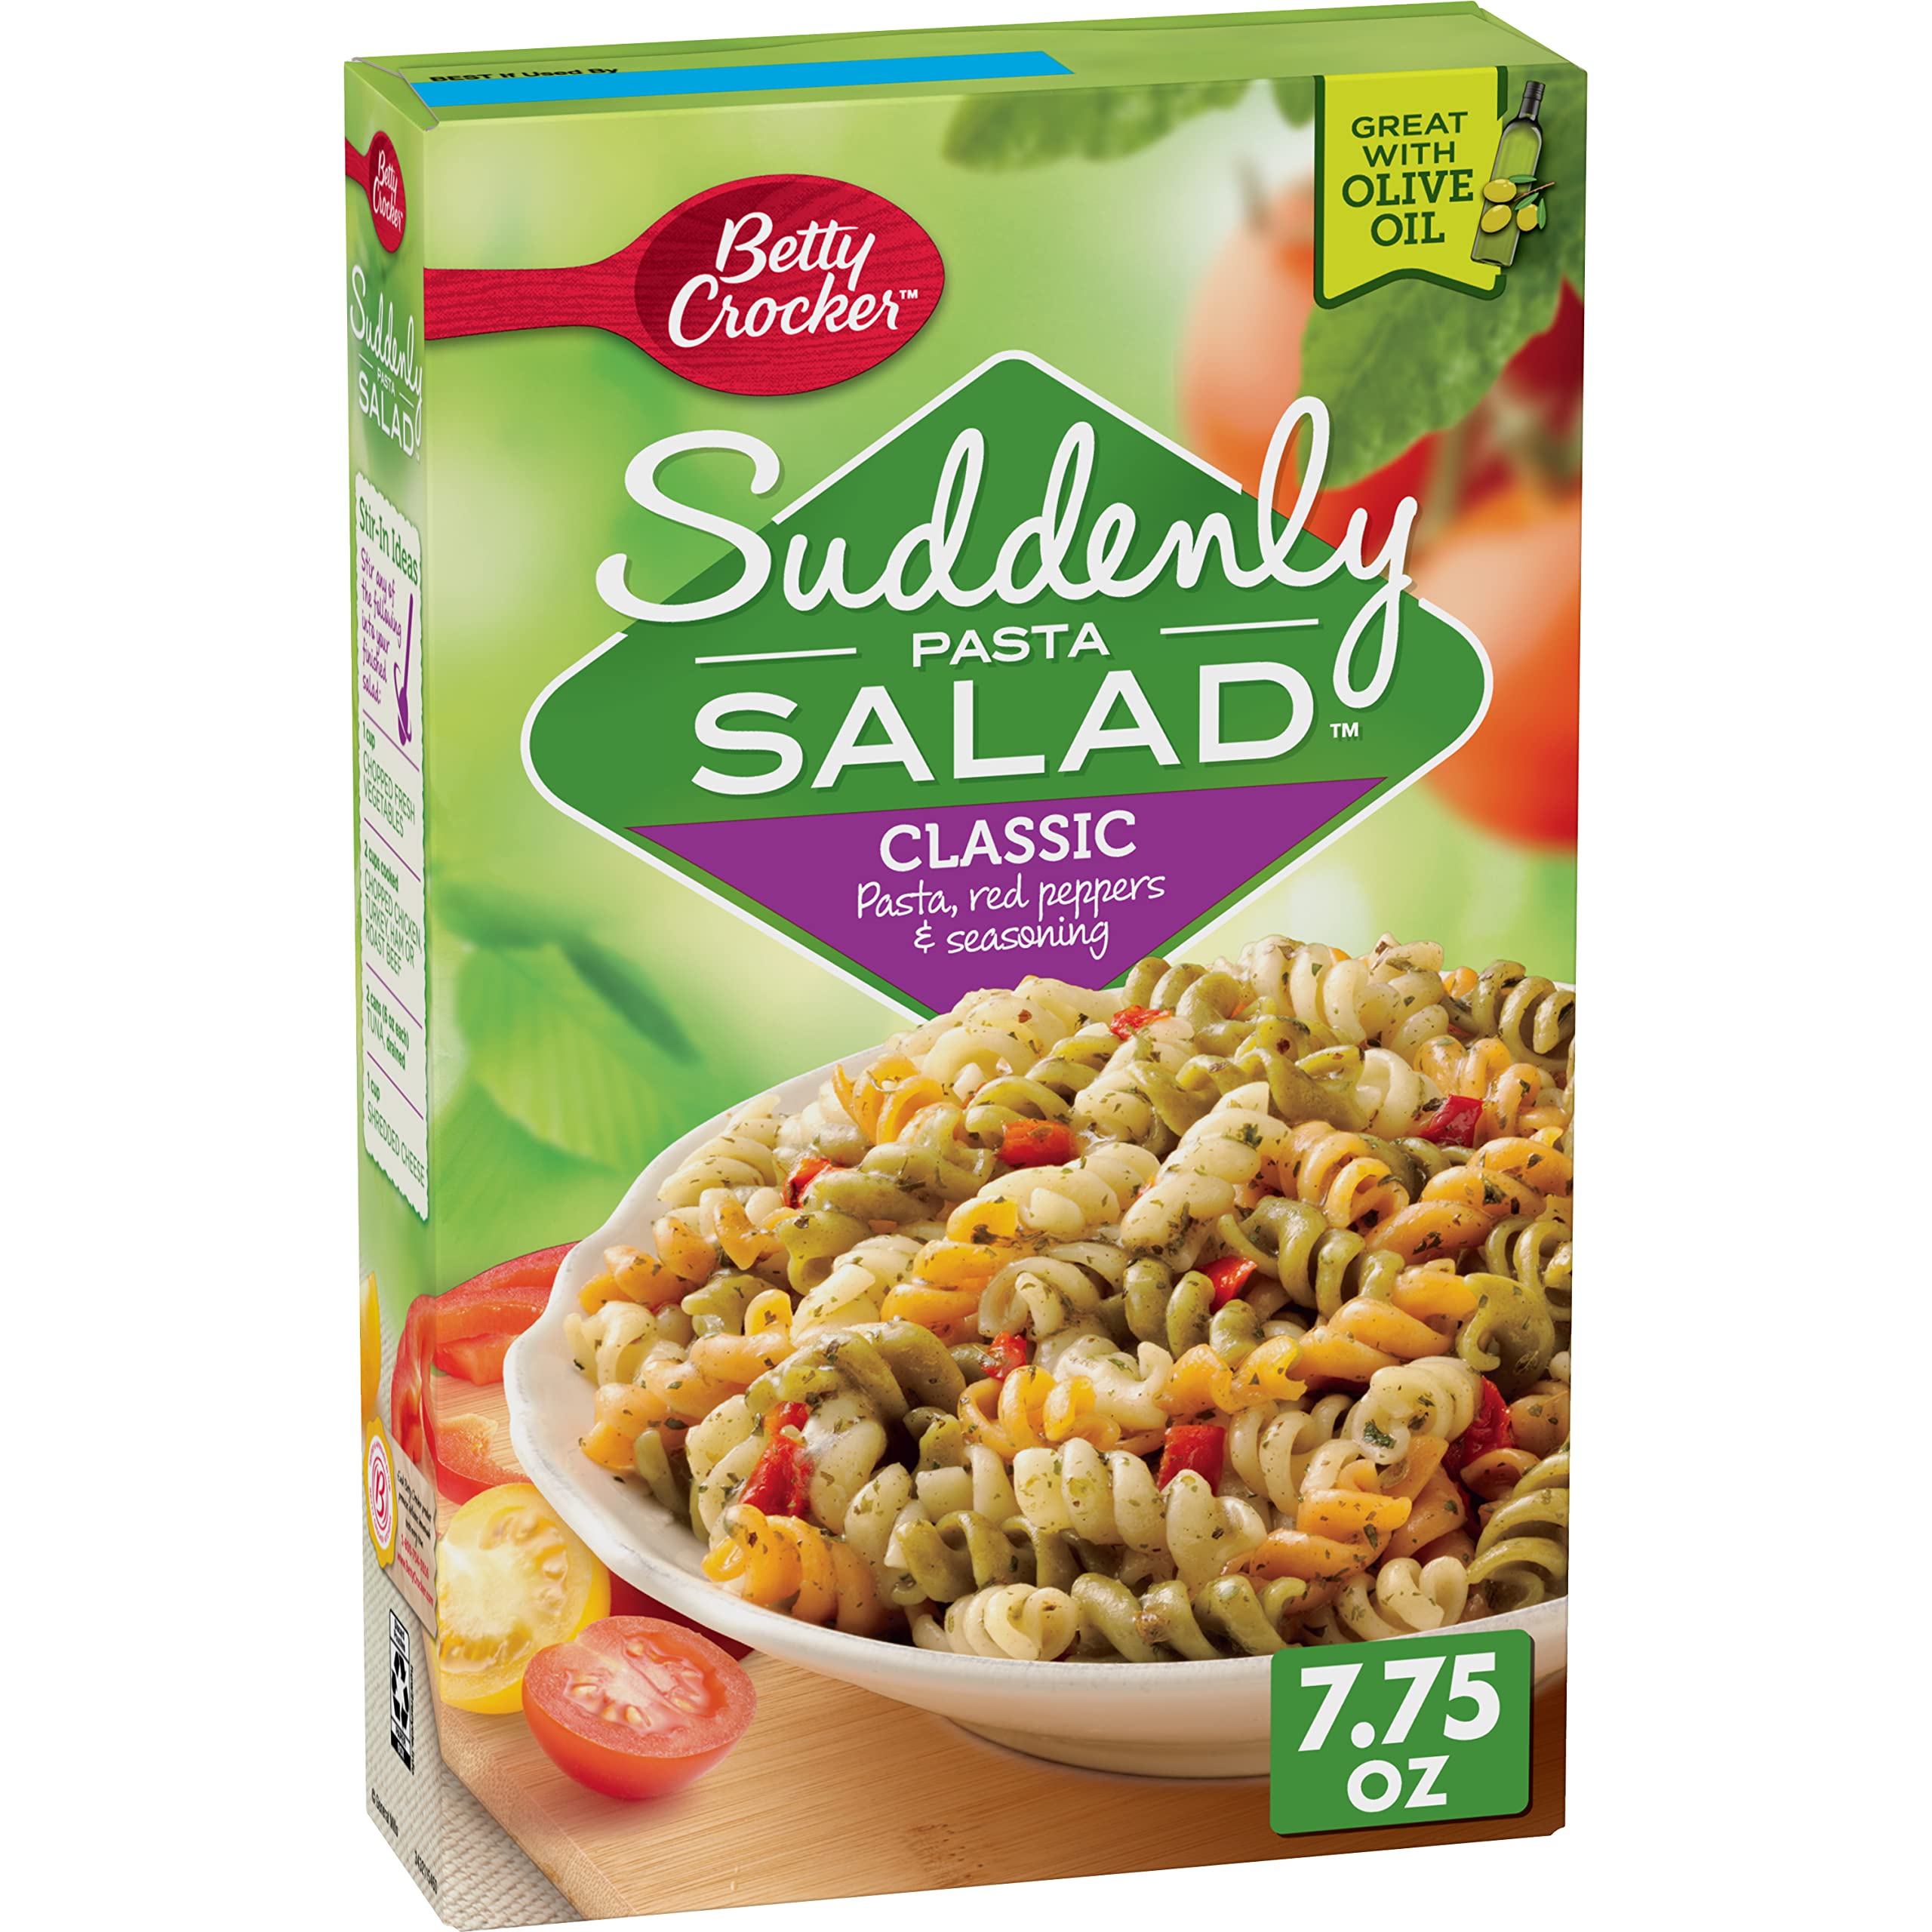 6-Pack 7.75-Oz Betty Crocker Suddenly Pasta Salad (Classic) $11.17 + Free Shipping w/ Prime or on $25+